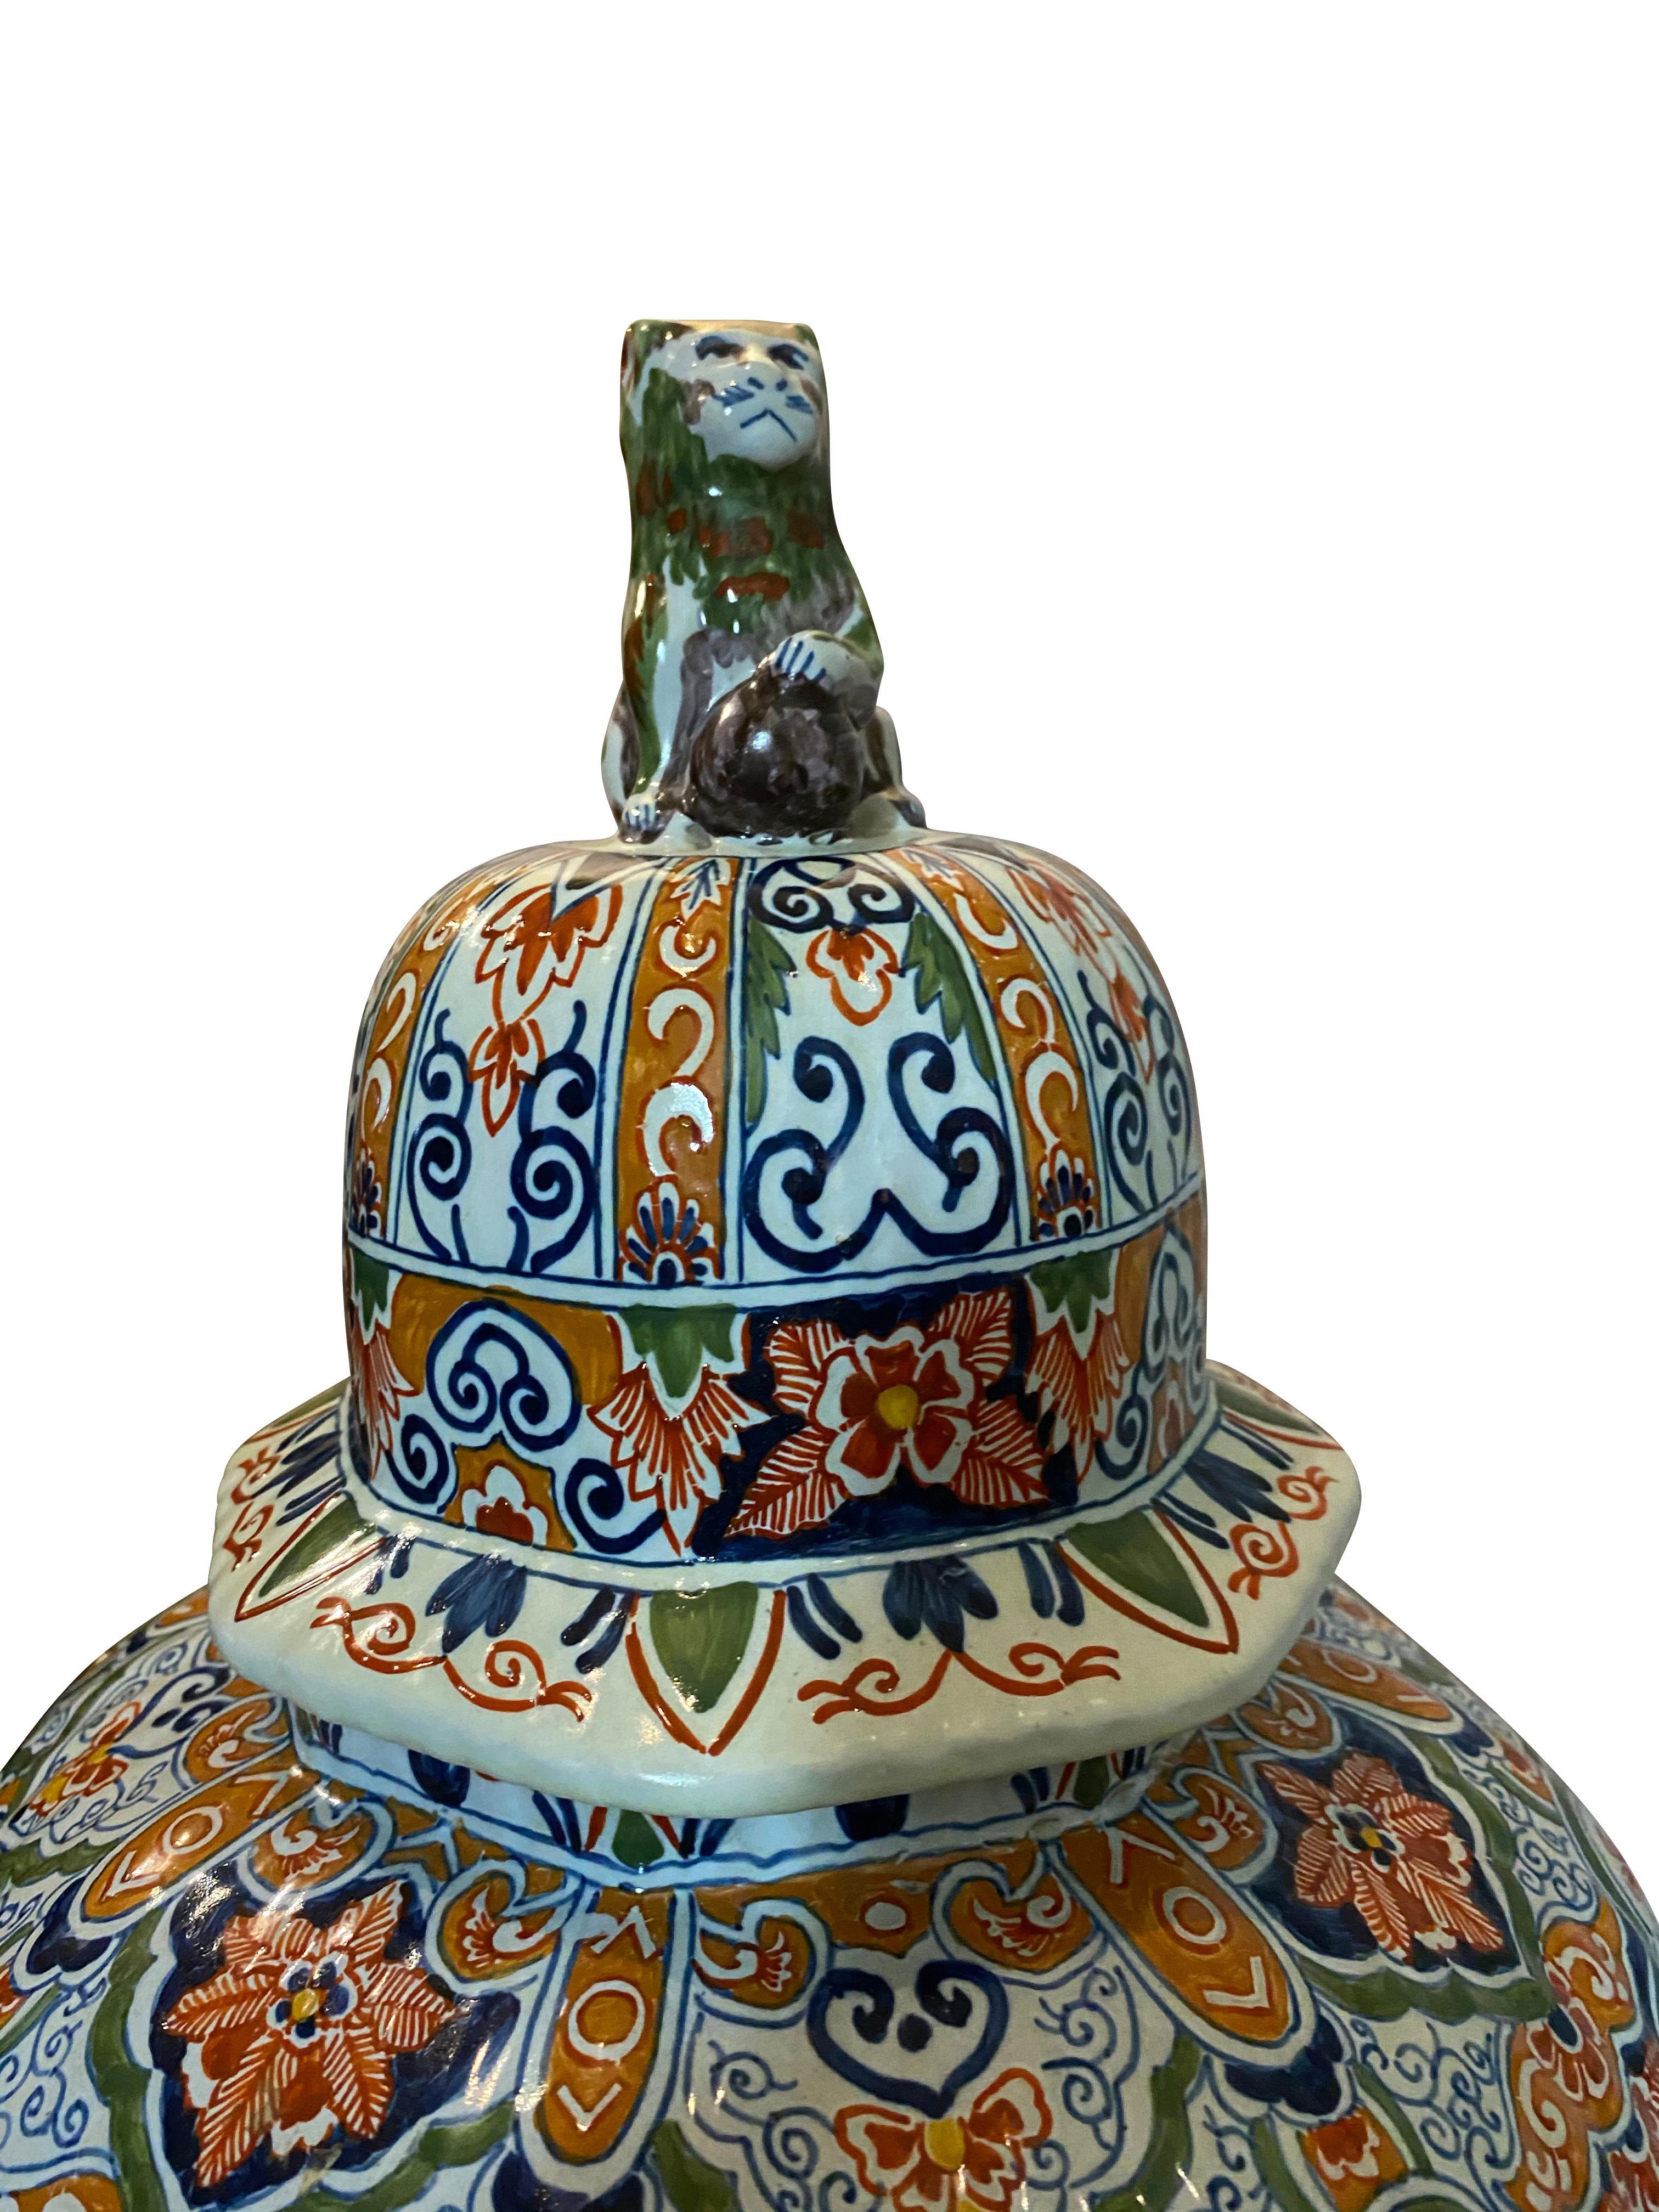 Delft Polychrome Decorated Melon Form Covered Vase In Good Condition For Sale In Essex, MA